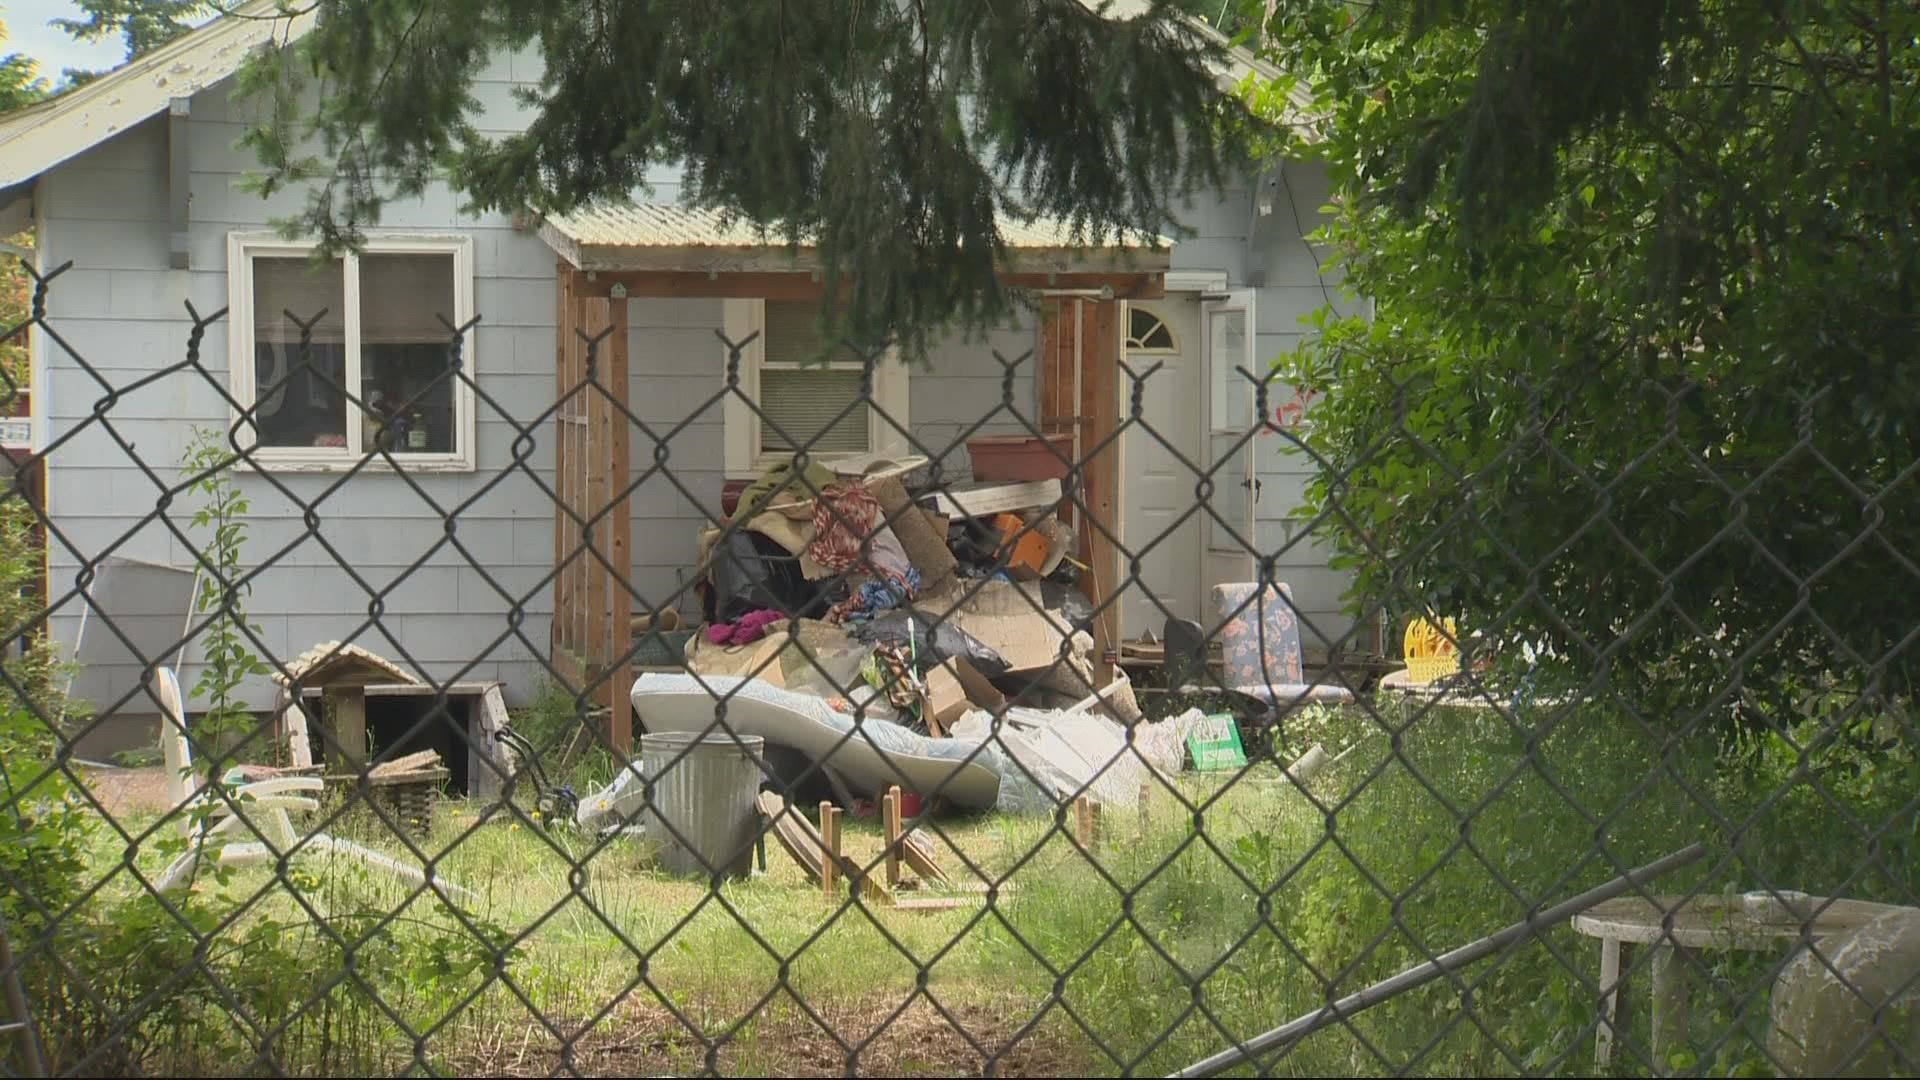 Families in the Southeast Portland neighborhood said that they’ve asked for help from police, but to no avail. KGW’s Blair Best has the story.